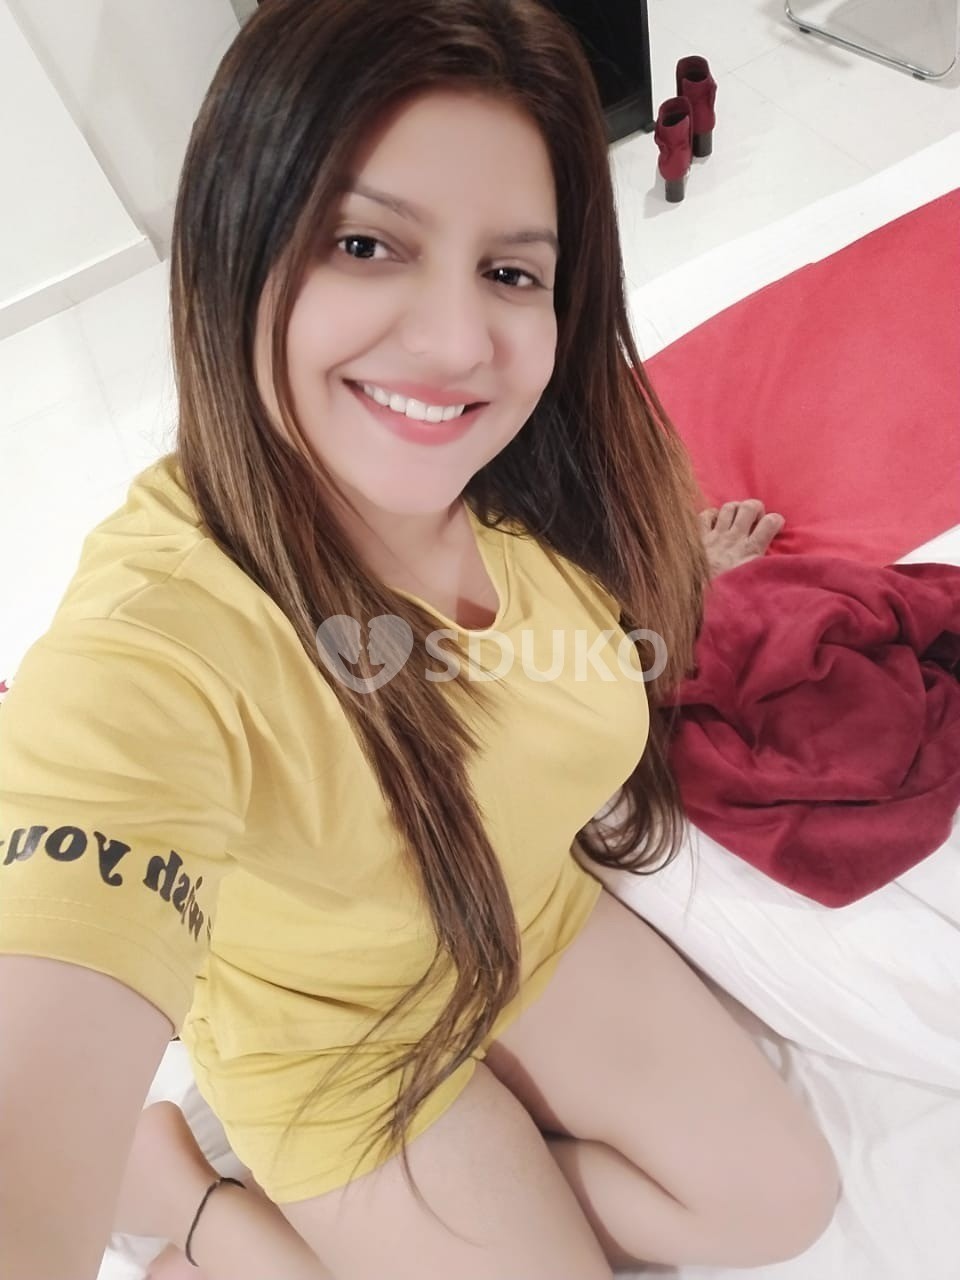 Mumbai mahim local⭐ (24x7) 99506//62280WhatsApp and call independent cheap and affordable models for Call Now